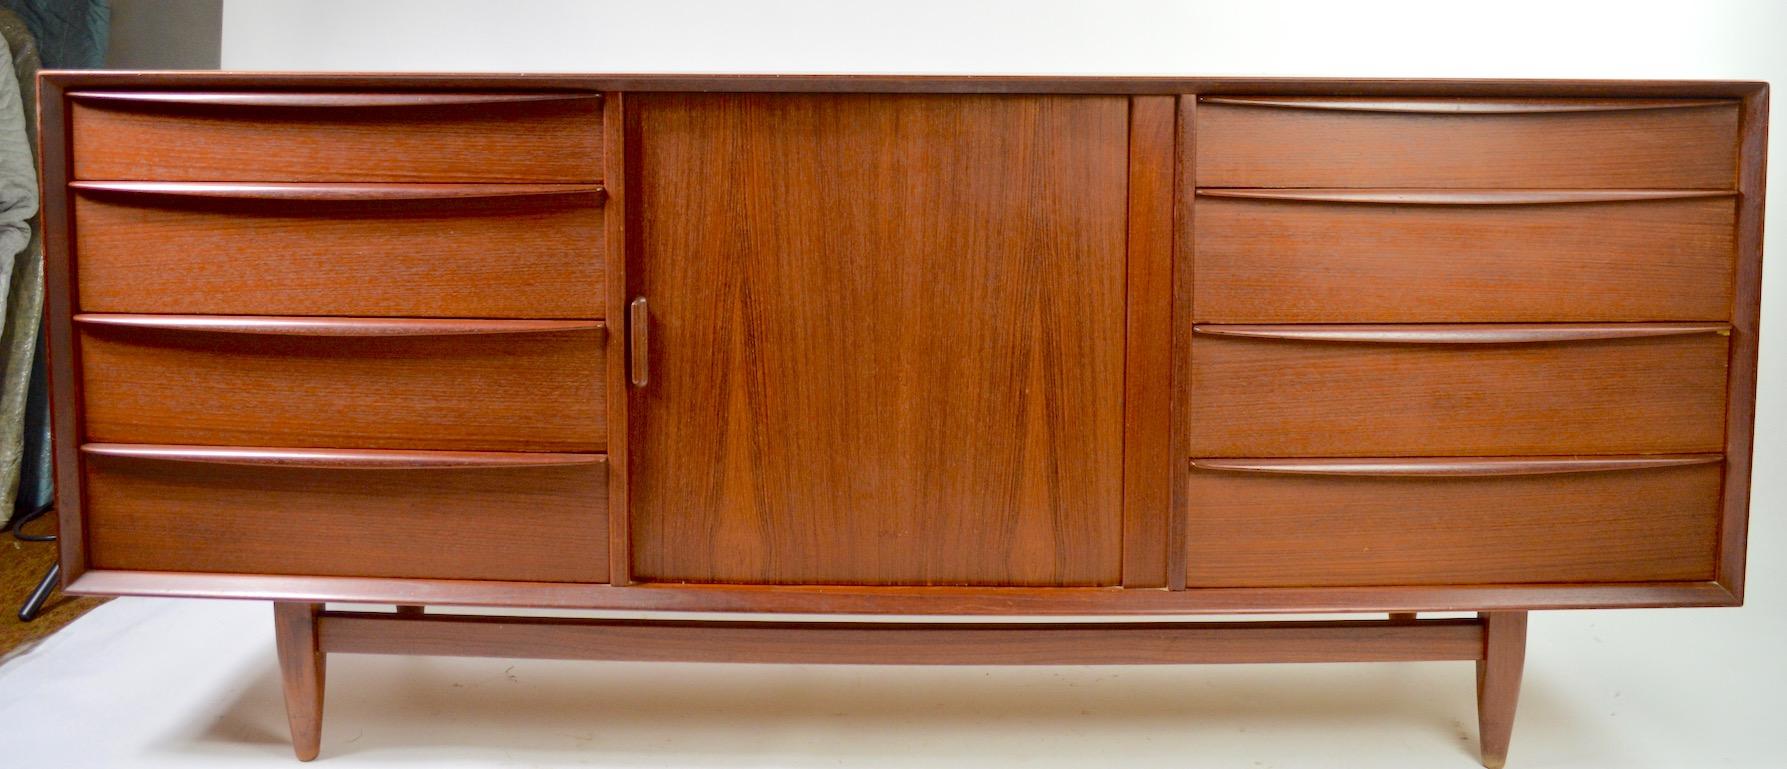 Nice Danish dresser in teak, by Falster. This example features two exposed banks of drawers flanking a center tambour roll section, which opens to reveal a set of interior drawers, providing ample storage space for garments etc. The cabinet is in